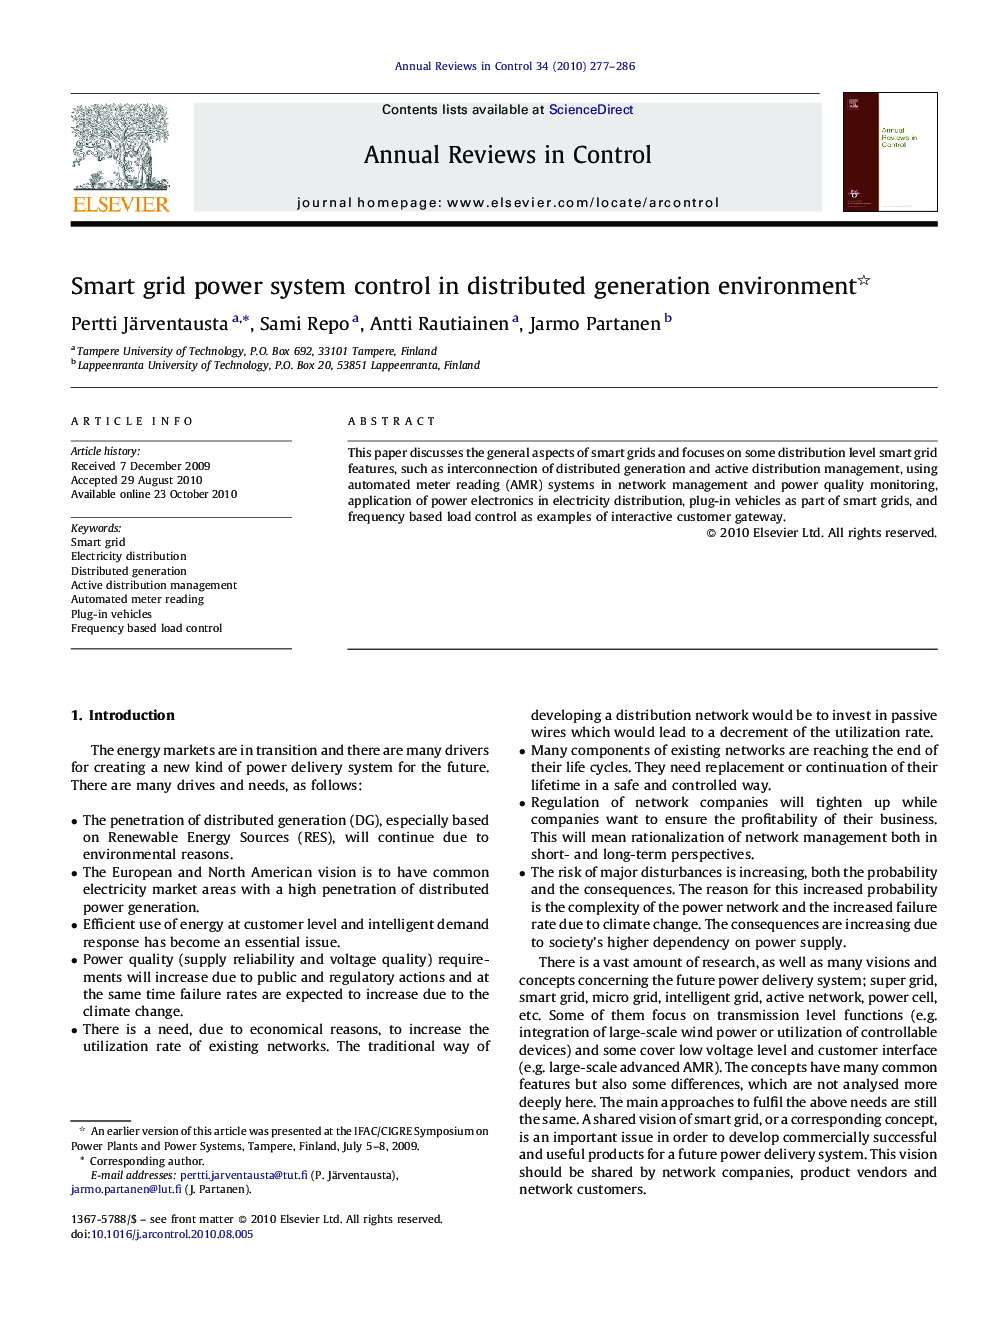 Smart grid power system control in distributed generation environment 